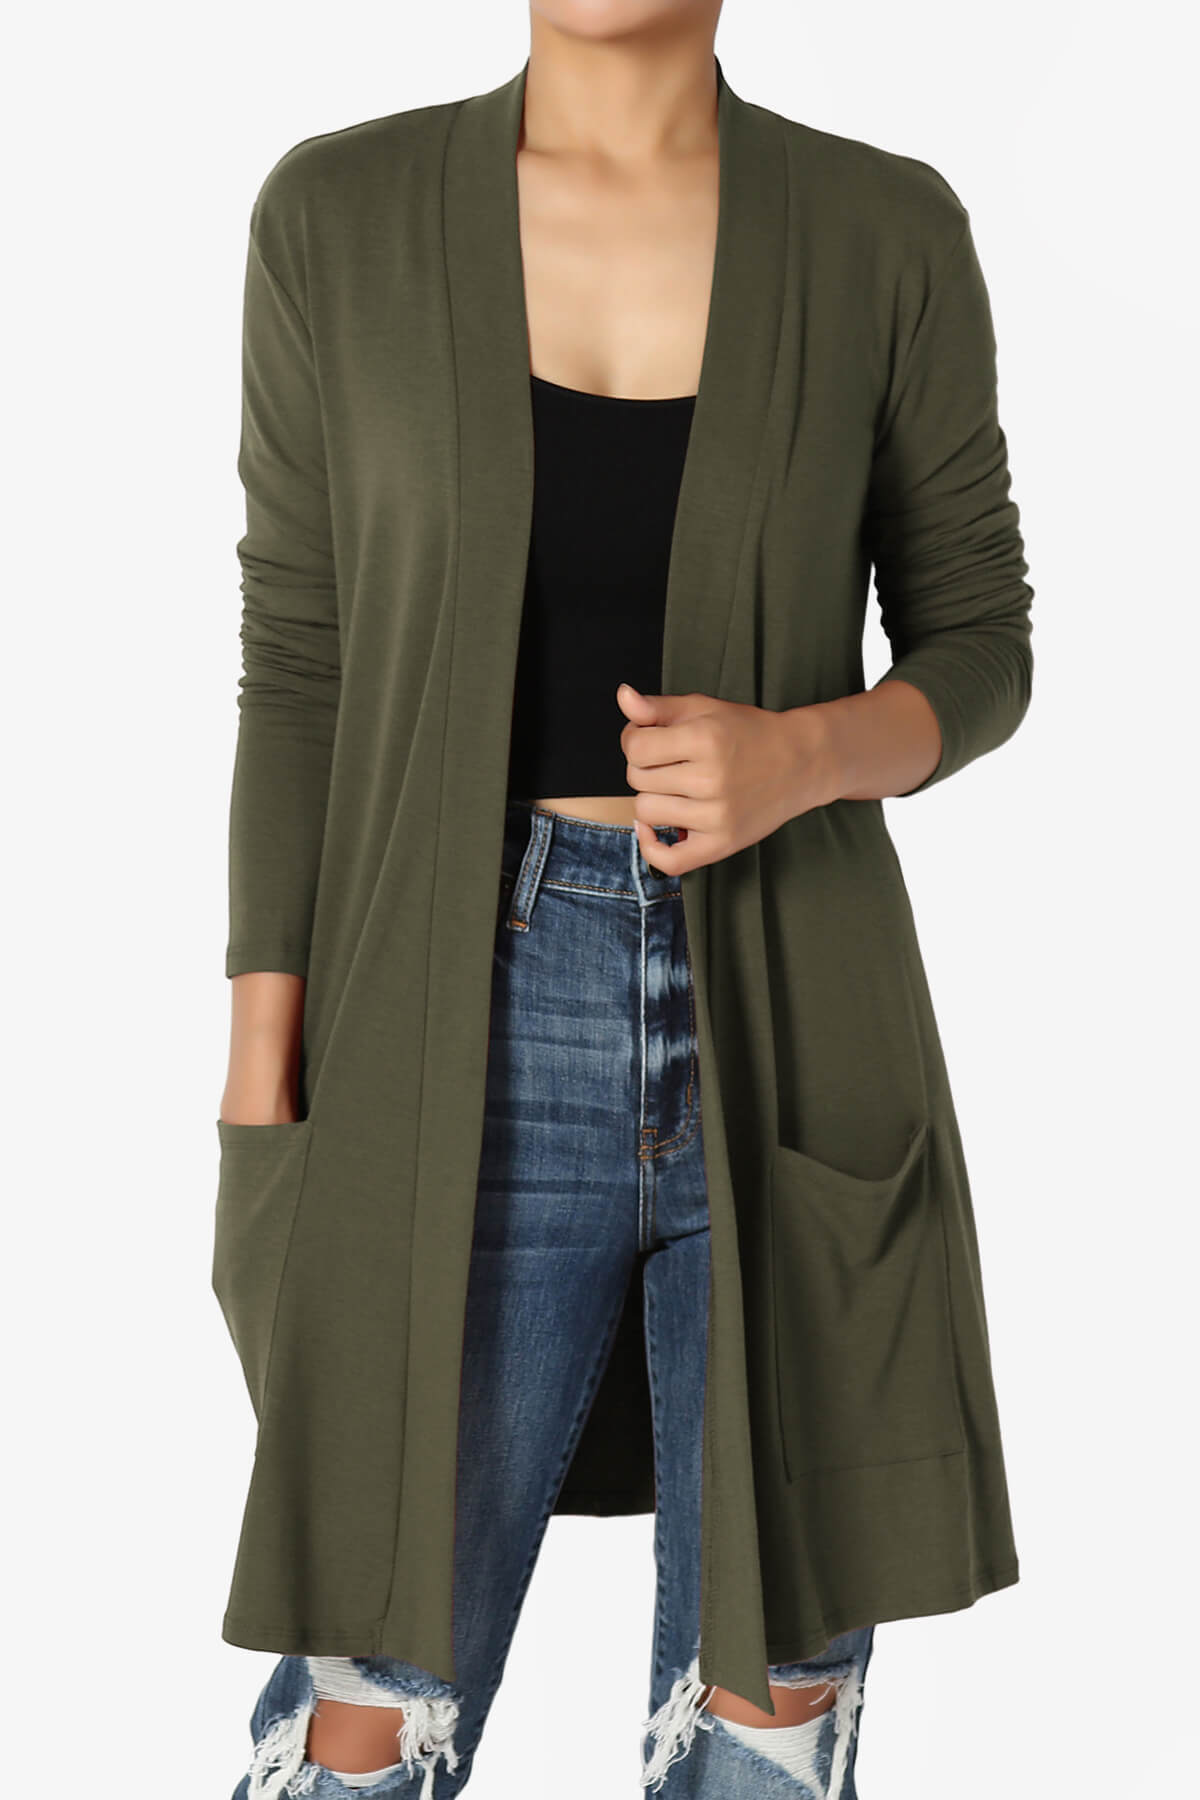 Daday Long Sleeve Pocket Open Front Cardigan OLIVE_1